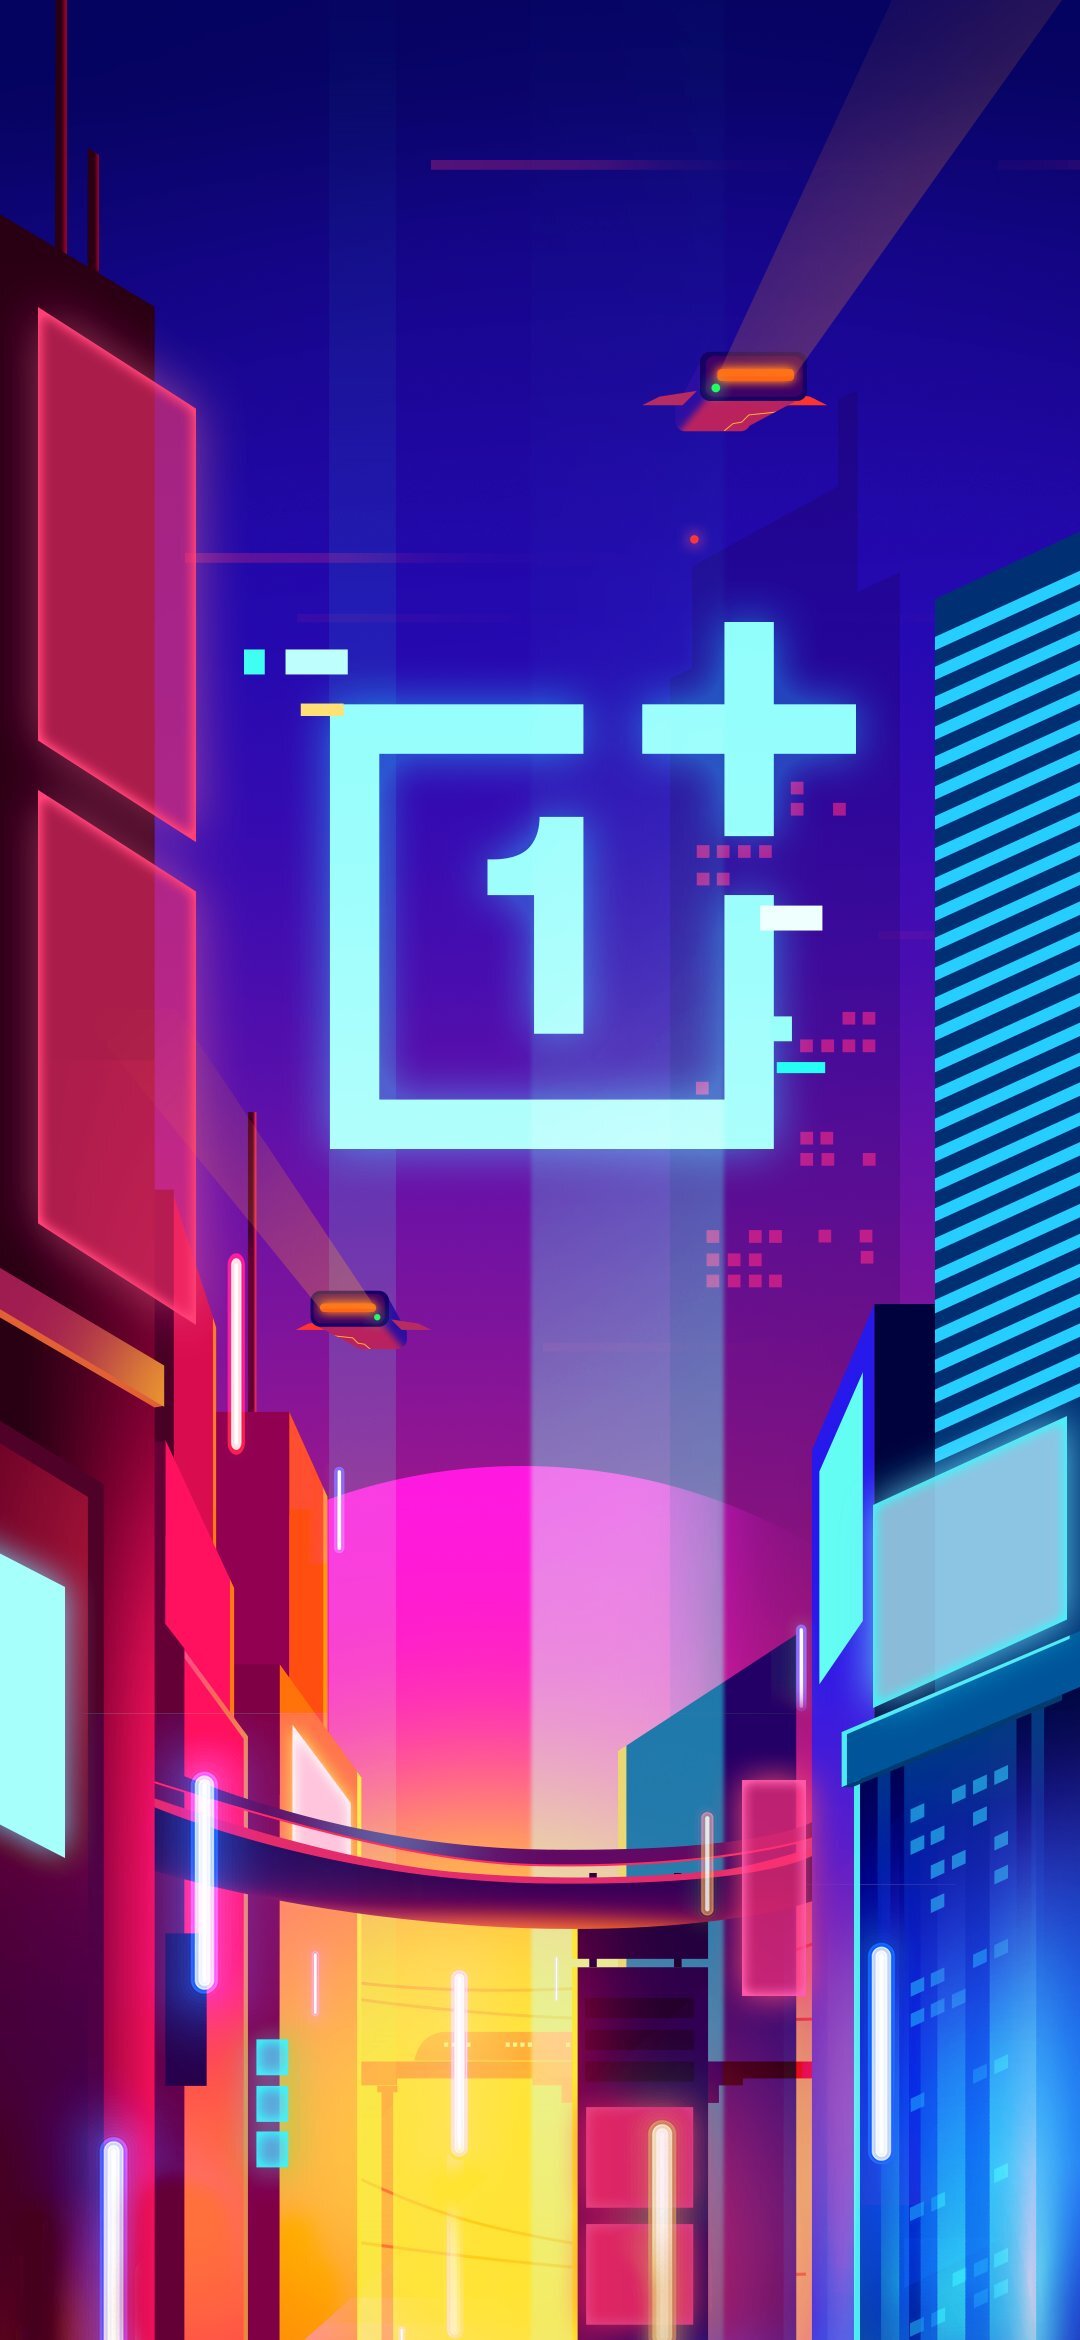 Download High Quality New OnePlus Logo Wallpapers from here - Gizmochina